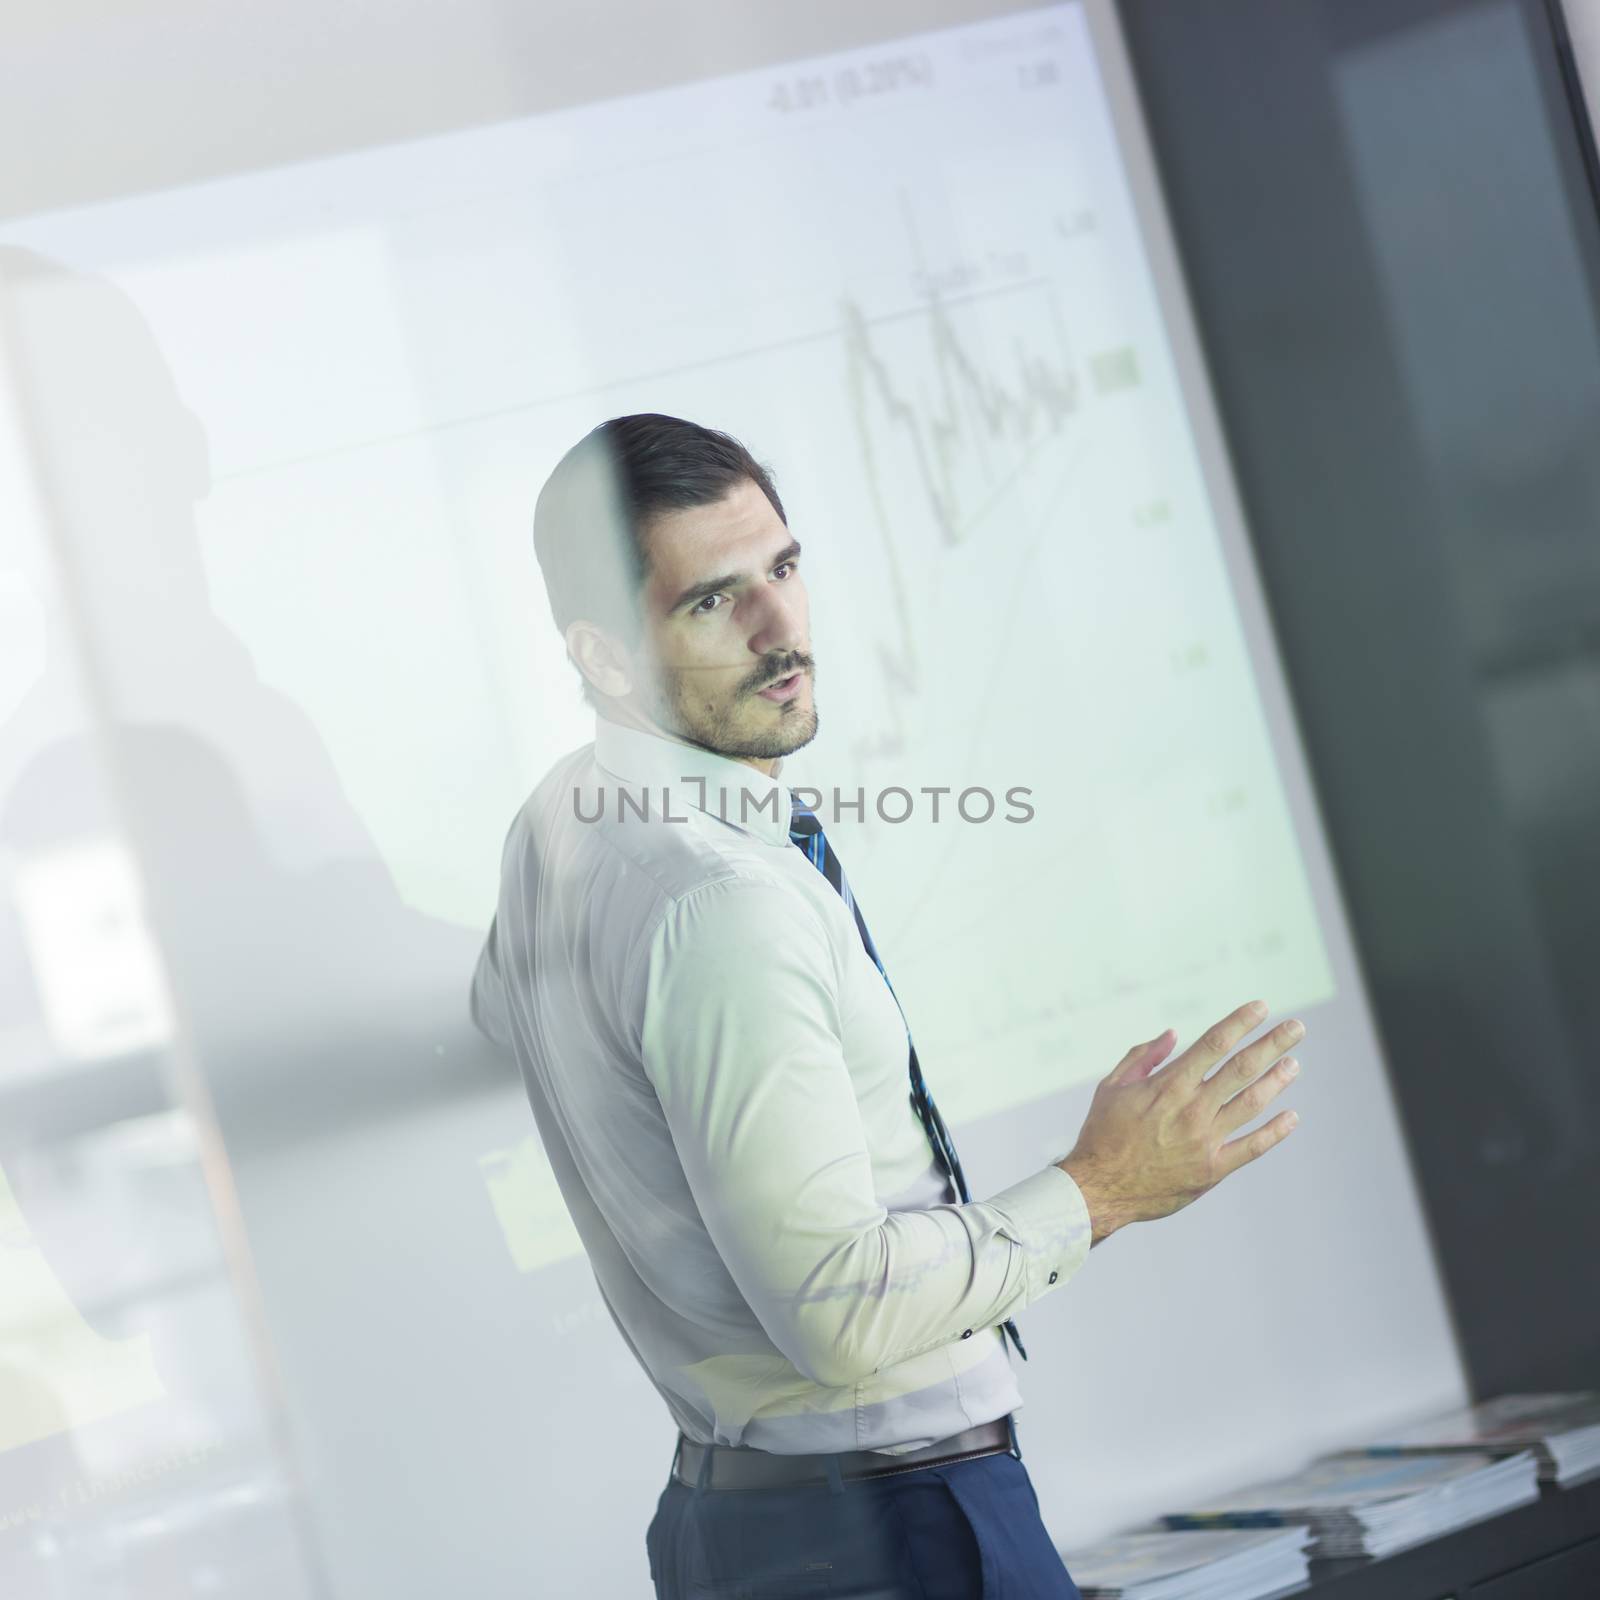 Business man making a presentation in front of whiteboard. Business executive delivering a presentation to his colleagues during meeting or in-house business training. View through glass.